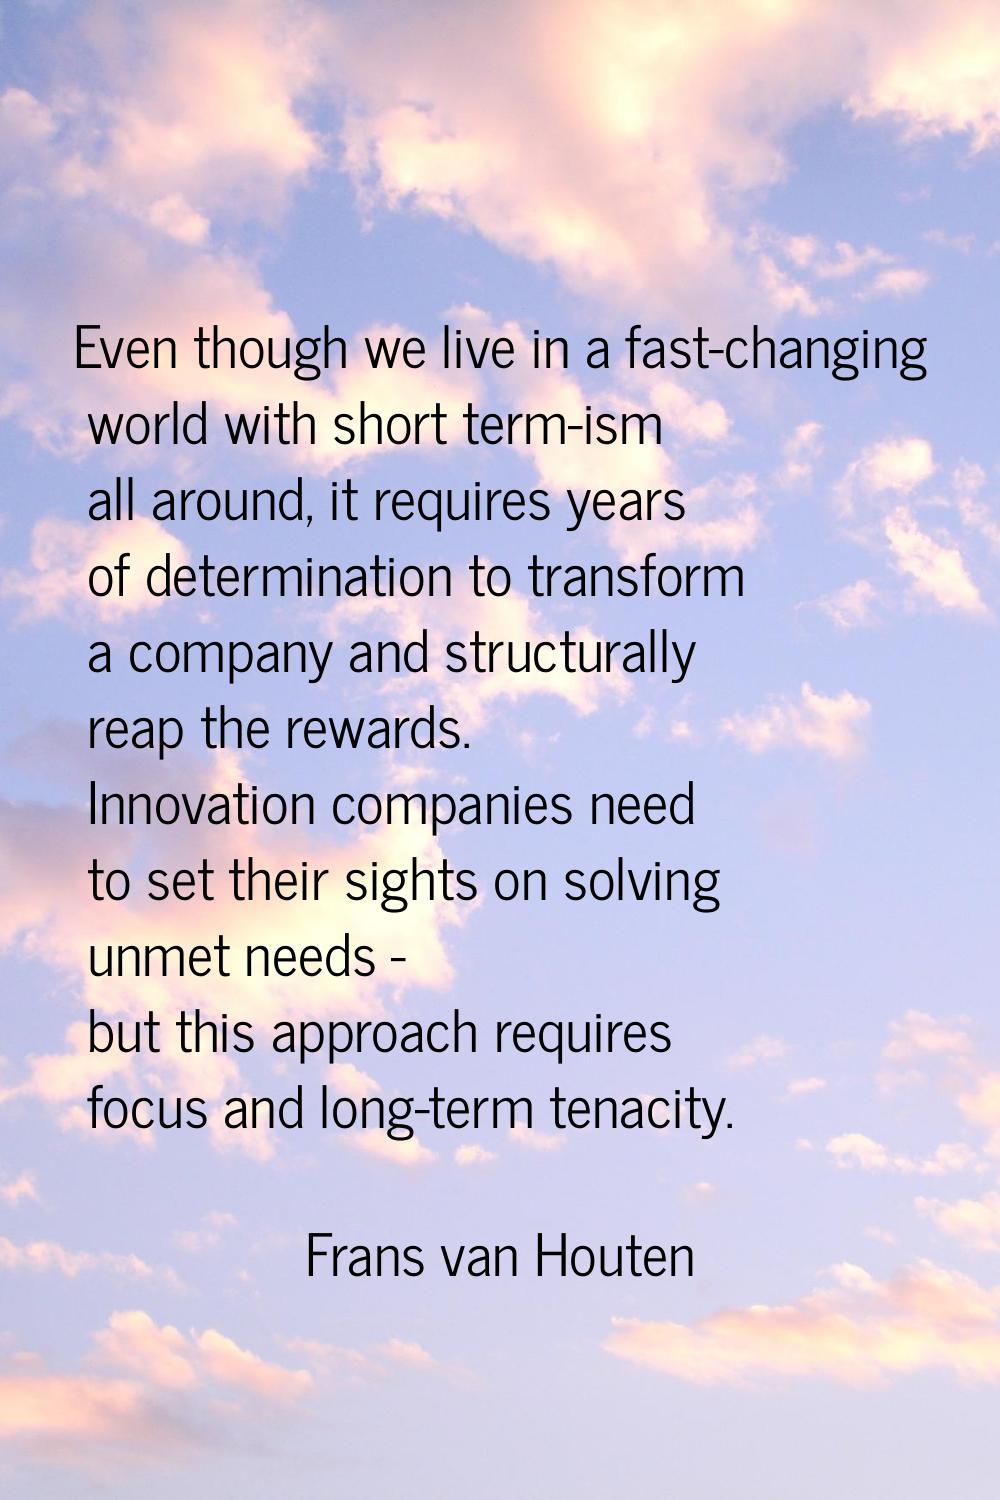 Even though we live in a fast-changing world with short term-ism all around, it requires years of d